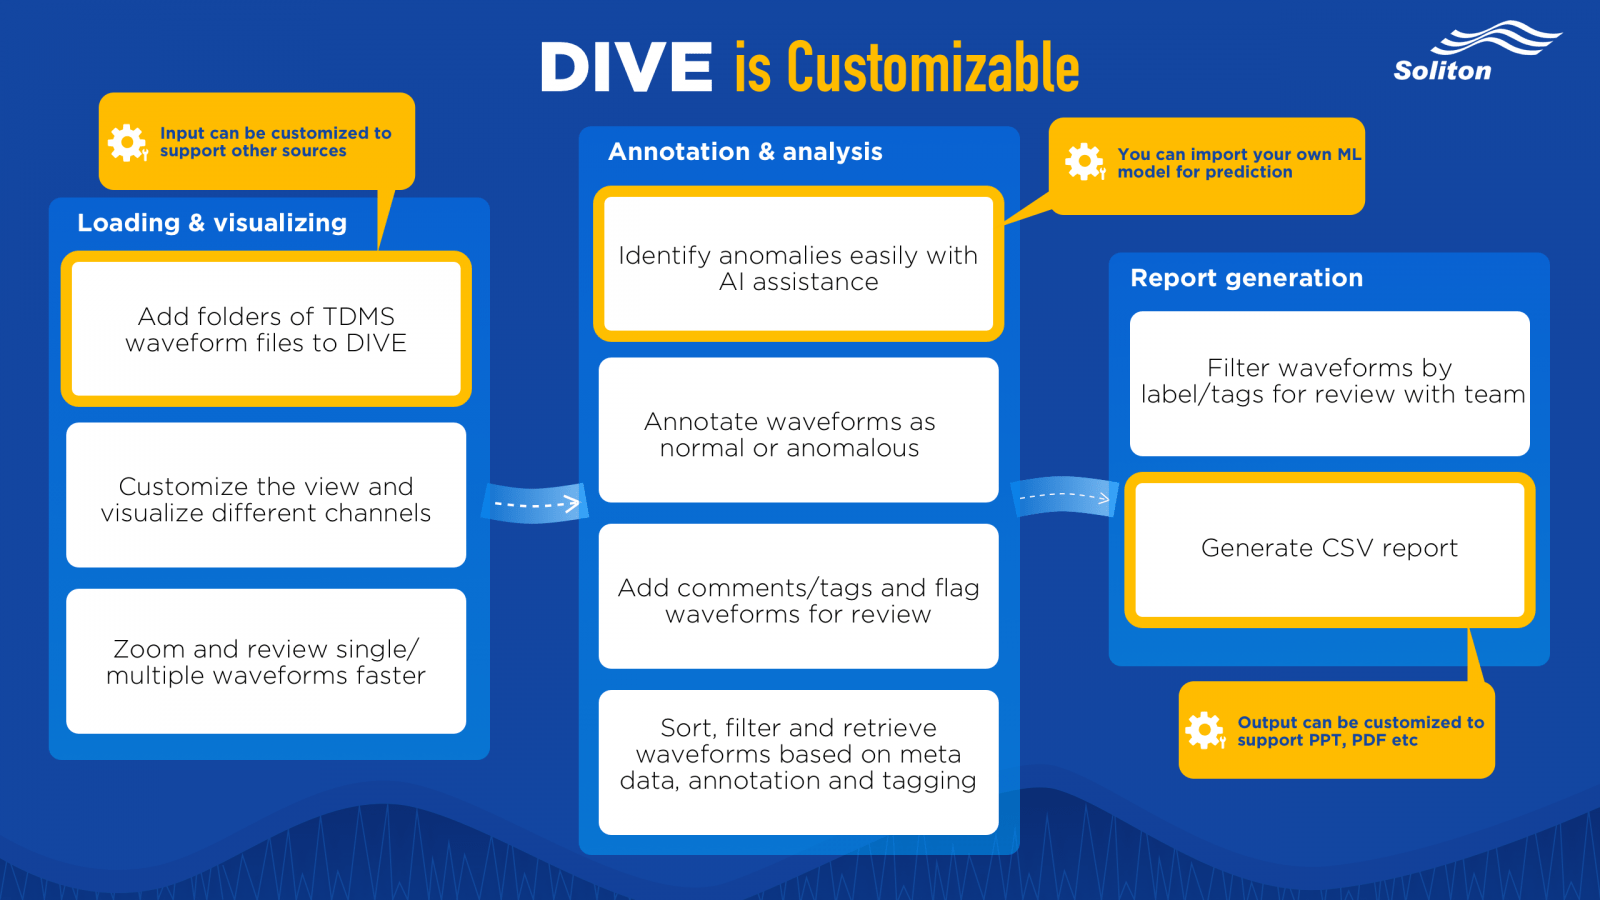 Workflow and Capabilities of DIVE